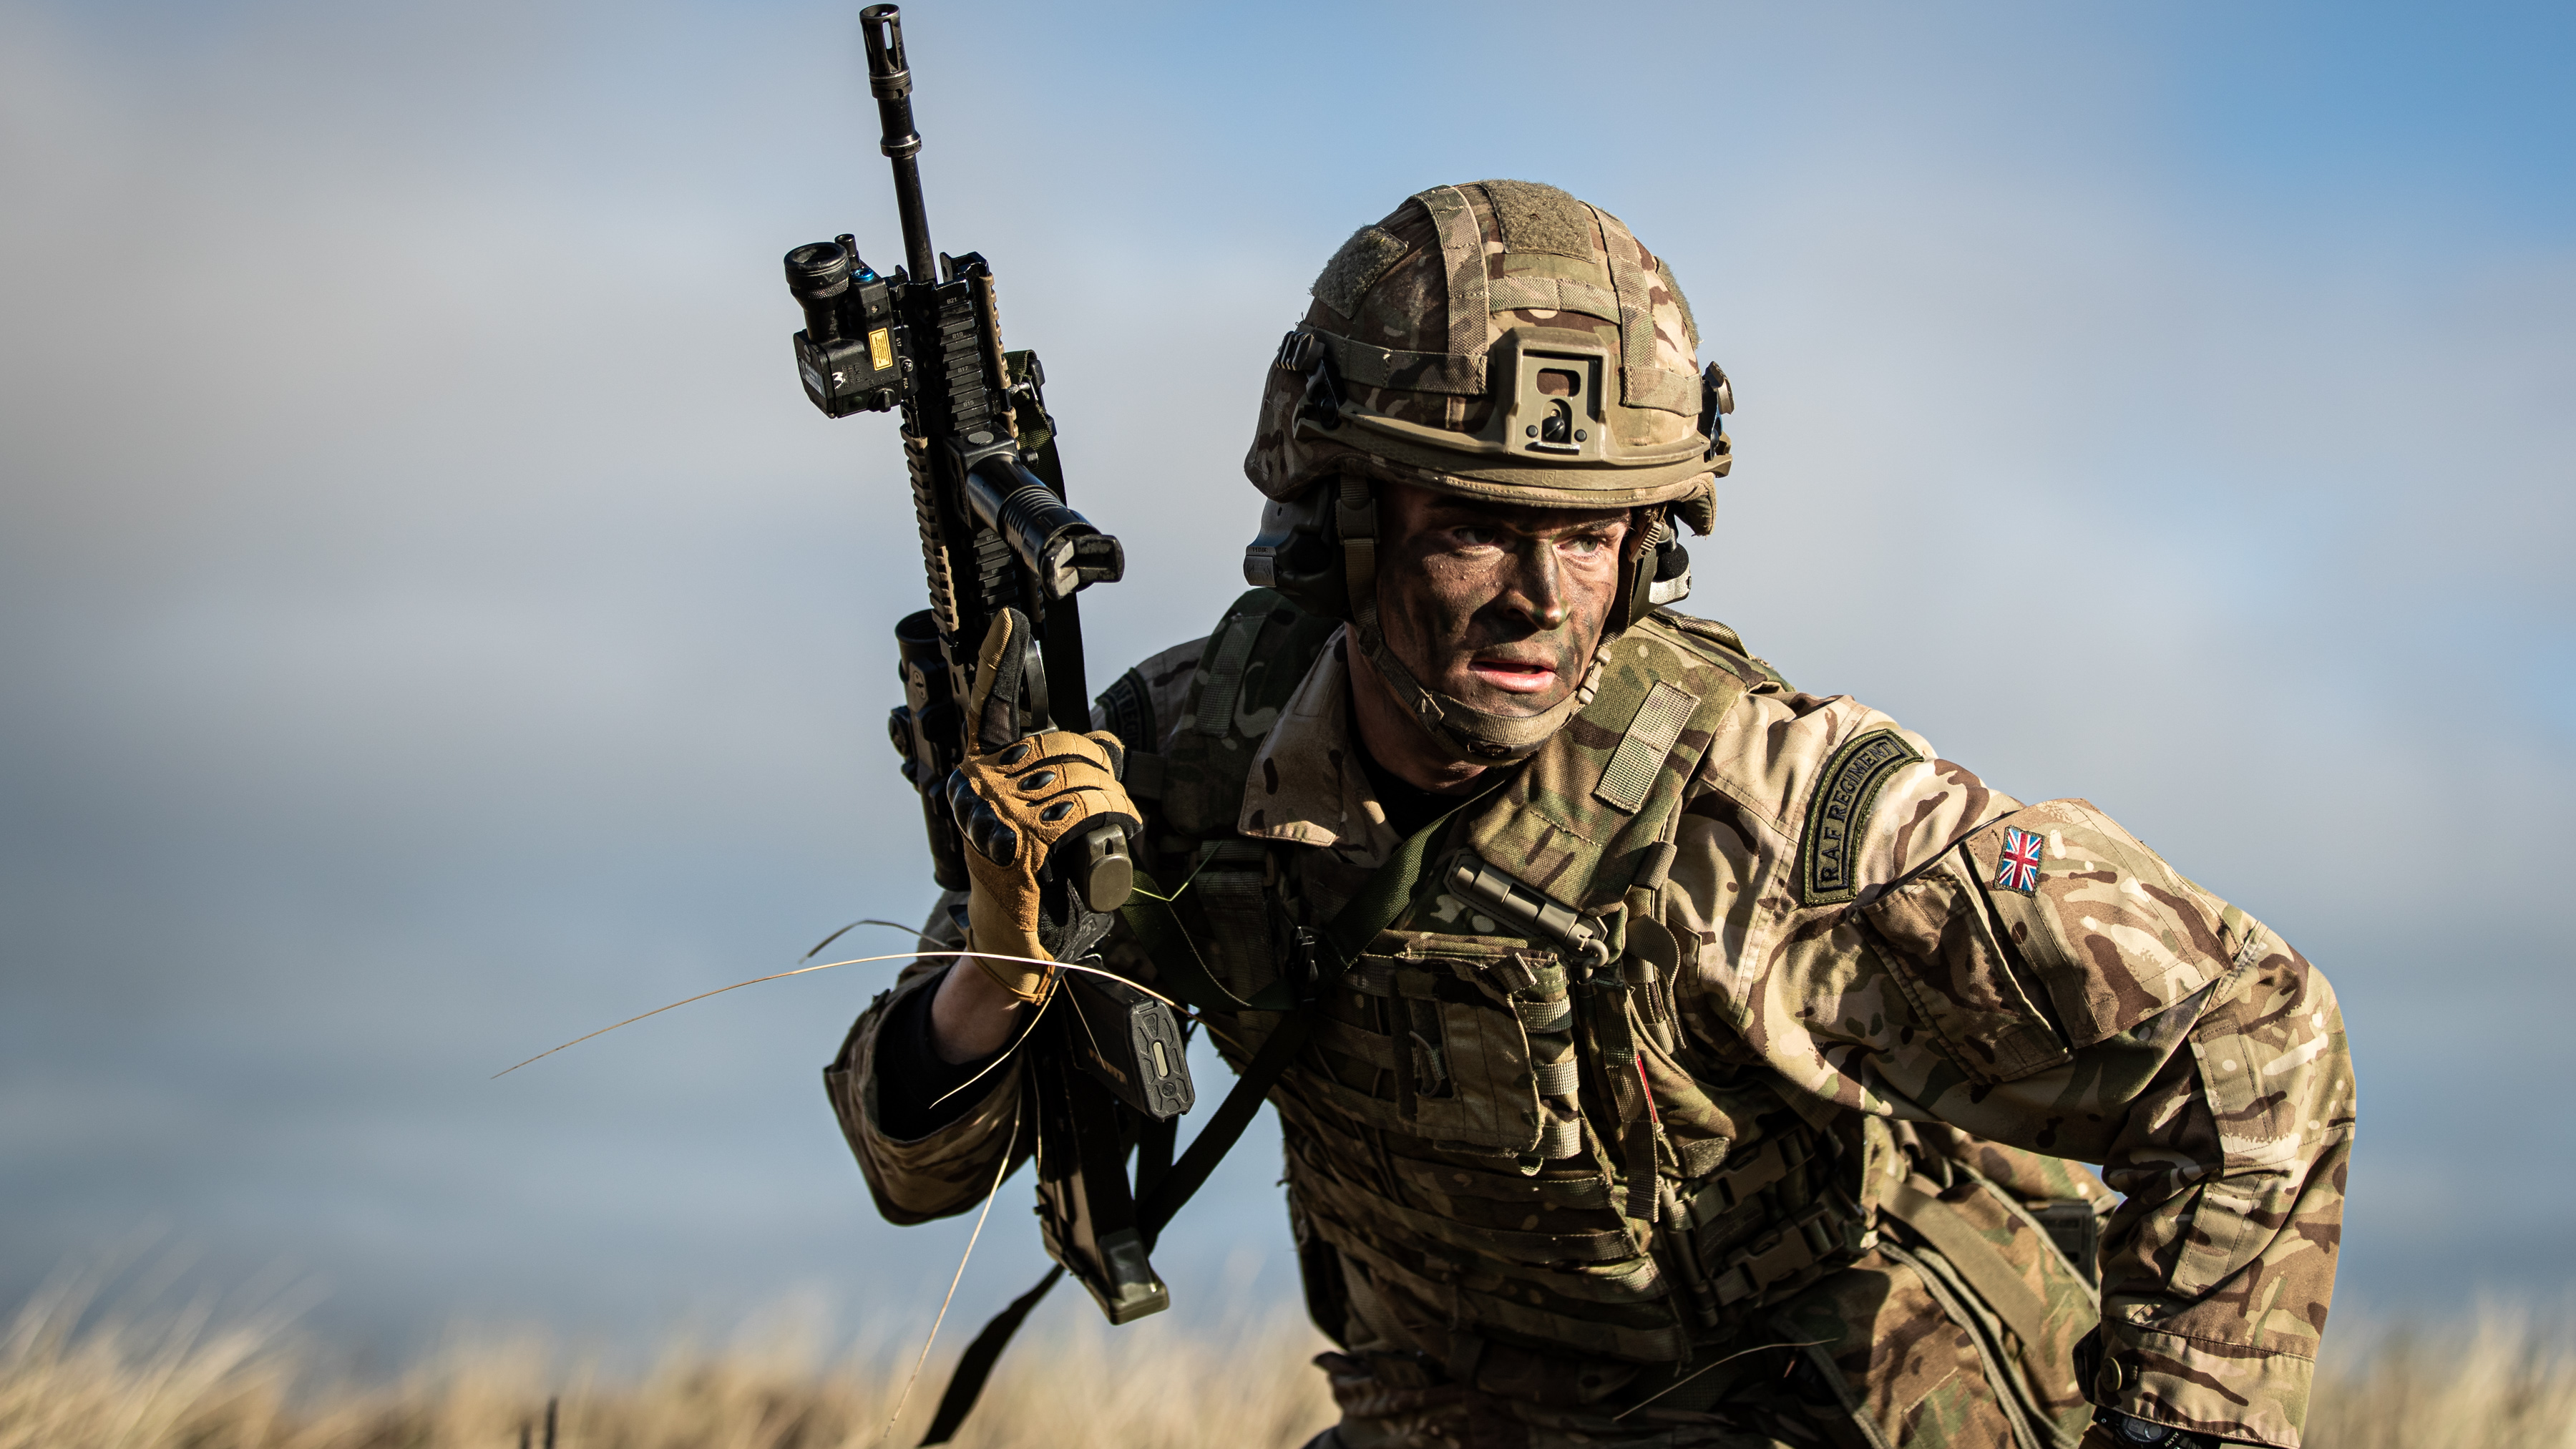 Image shows RAF Regiment holding rifle during exercise.